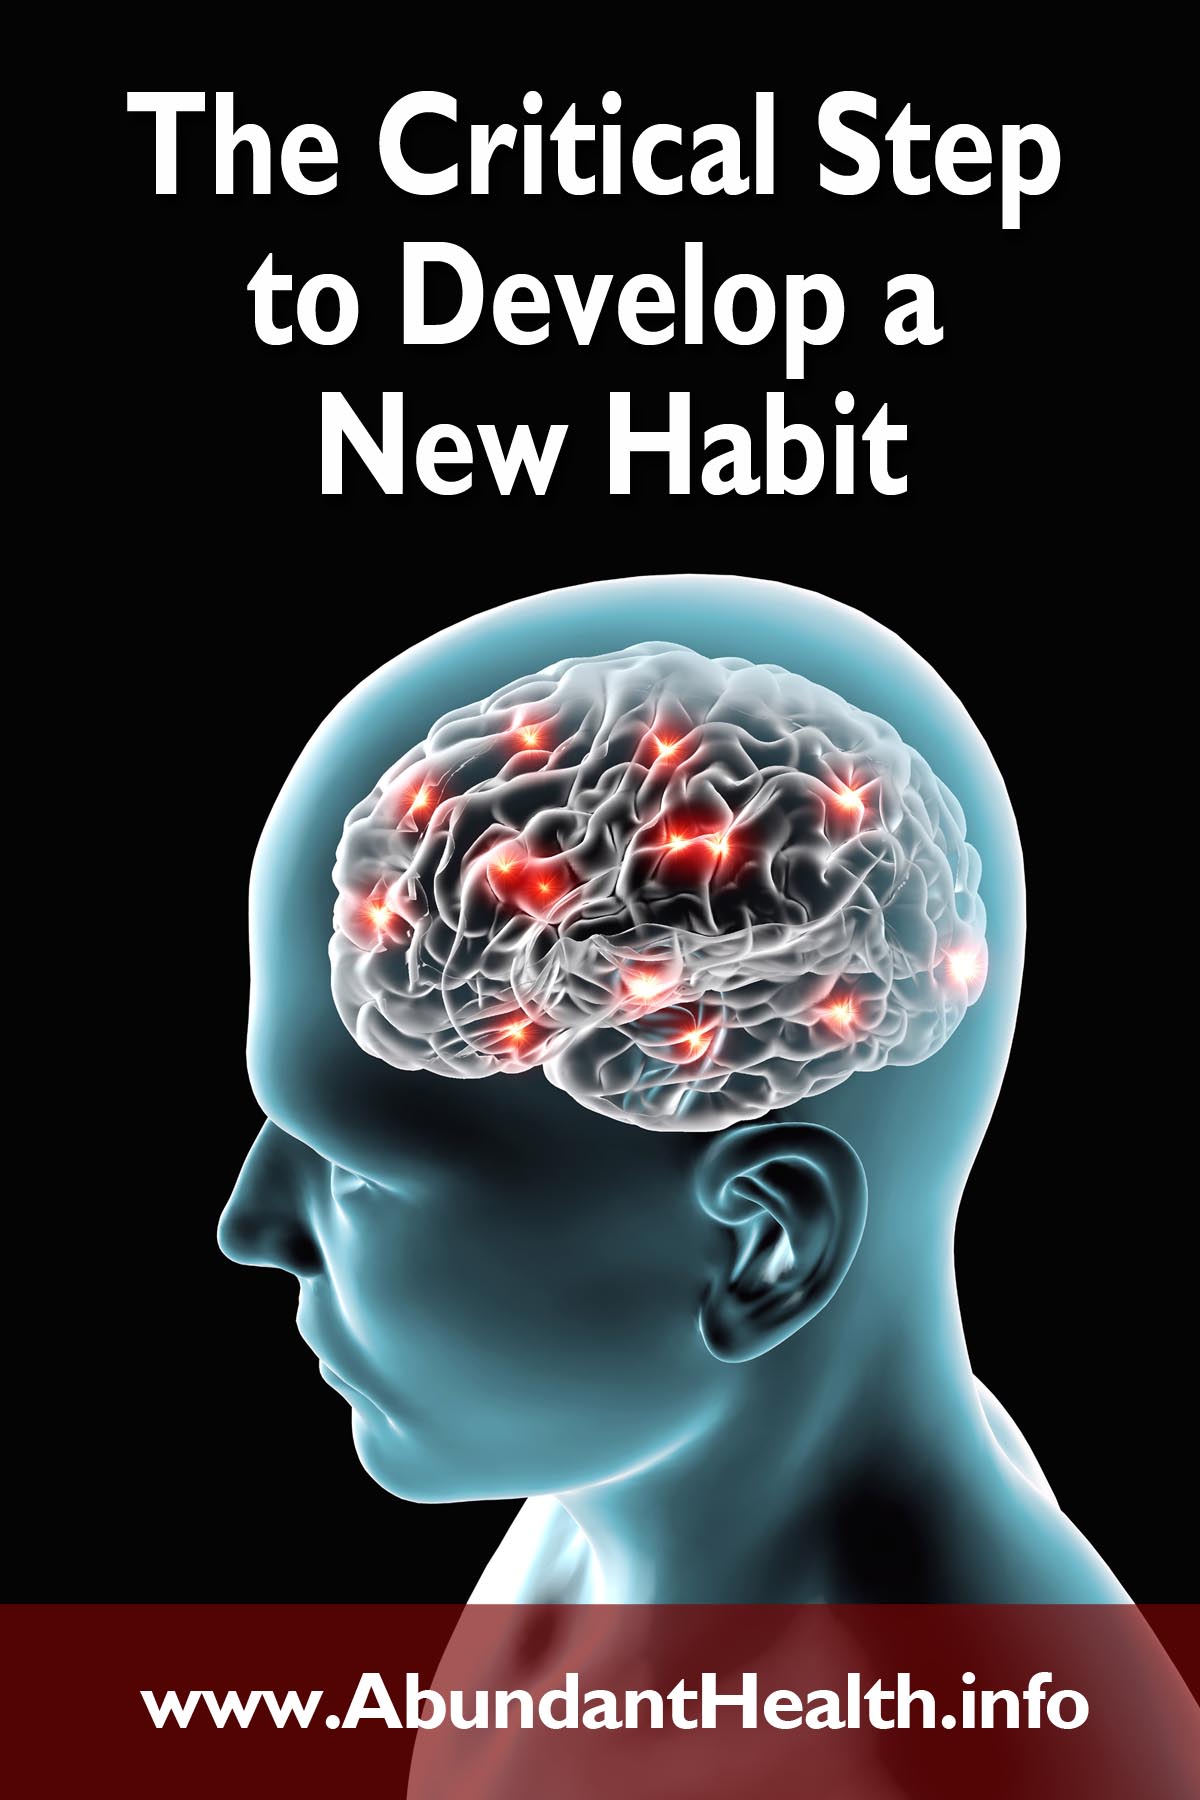 The Critical Step to Develop a New Habit